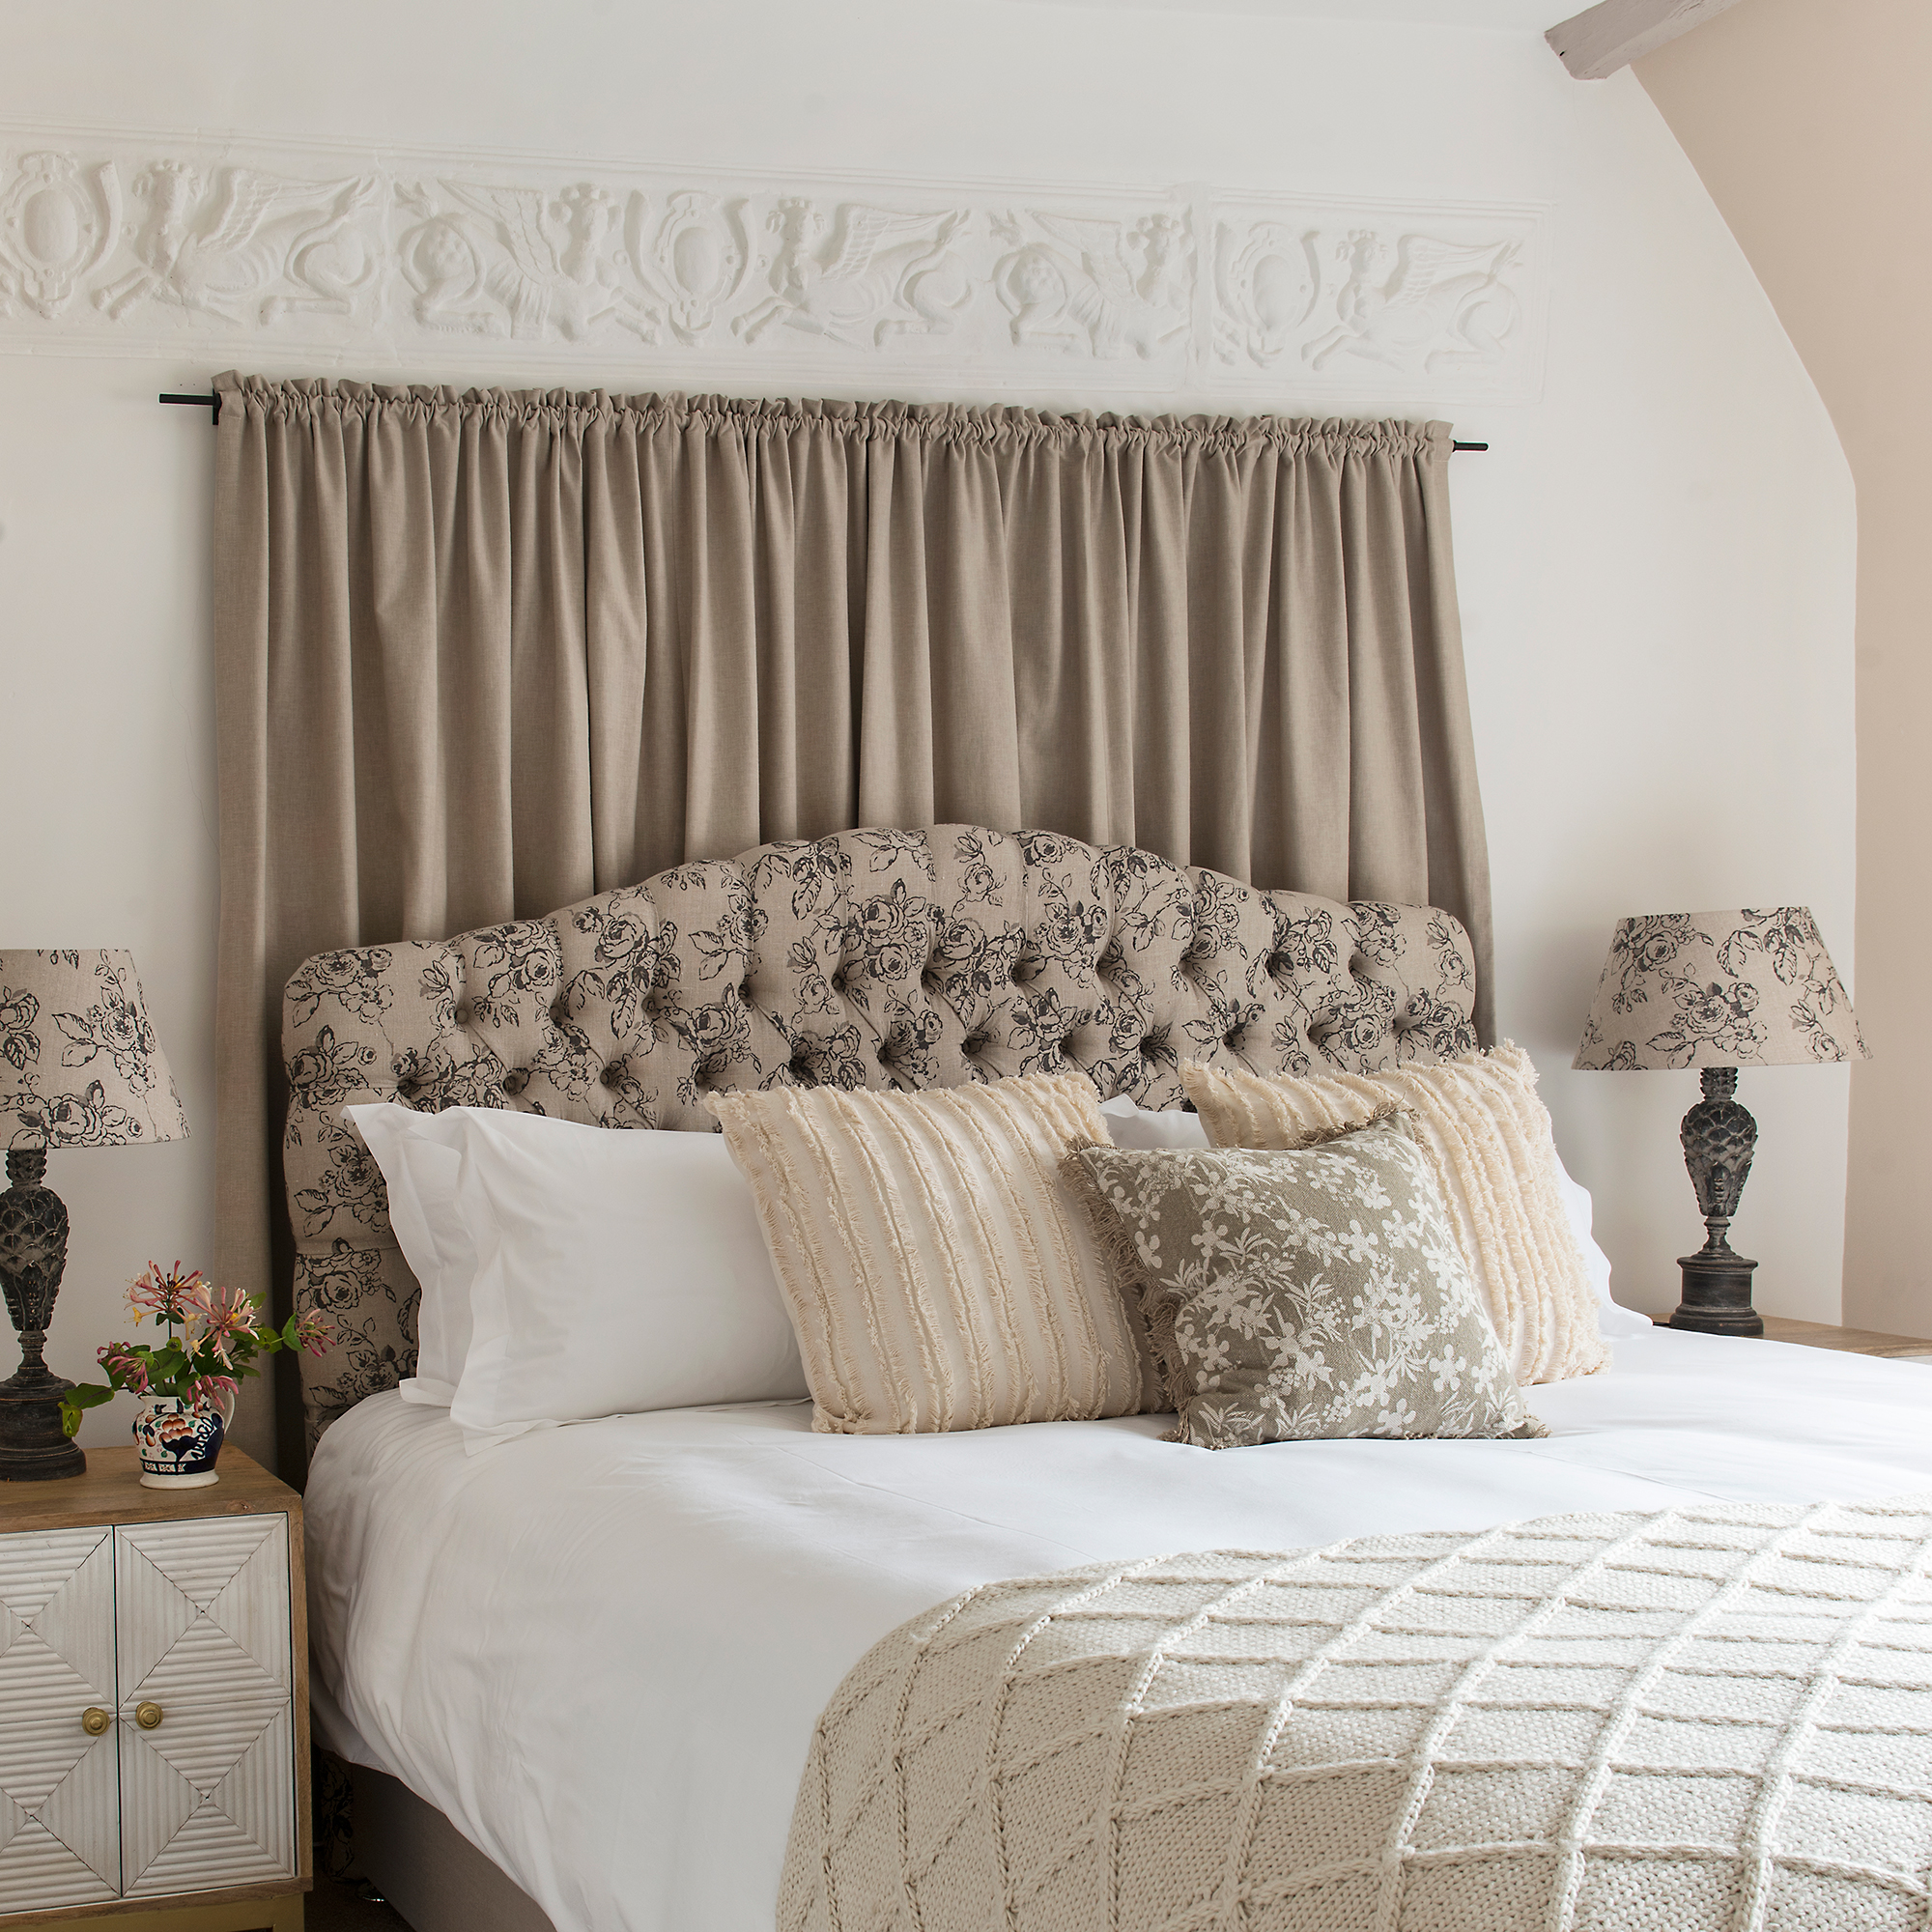 beige and neutral bedroom scheme in a cottage with headboard curtain